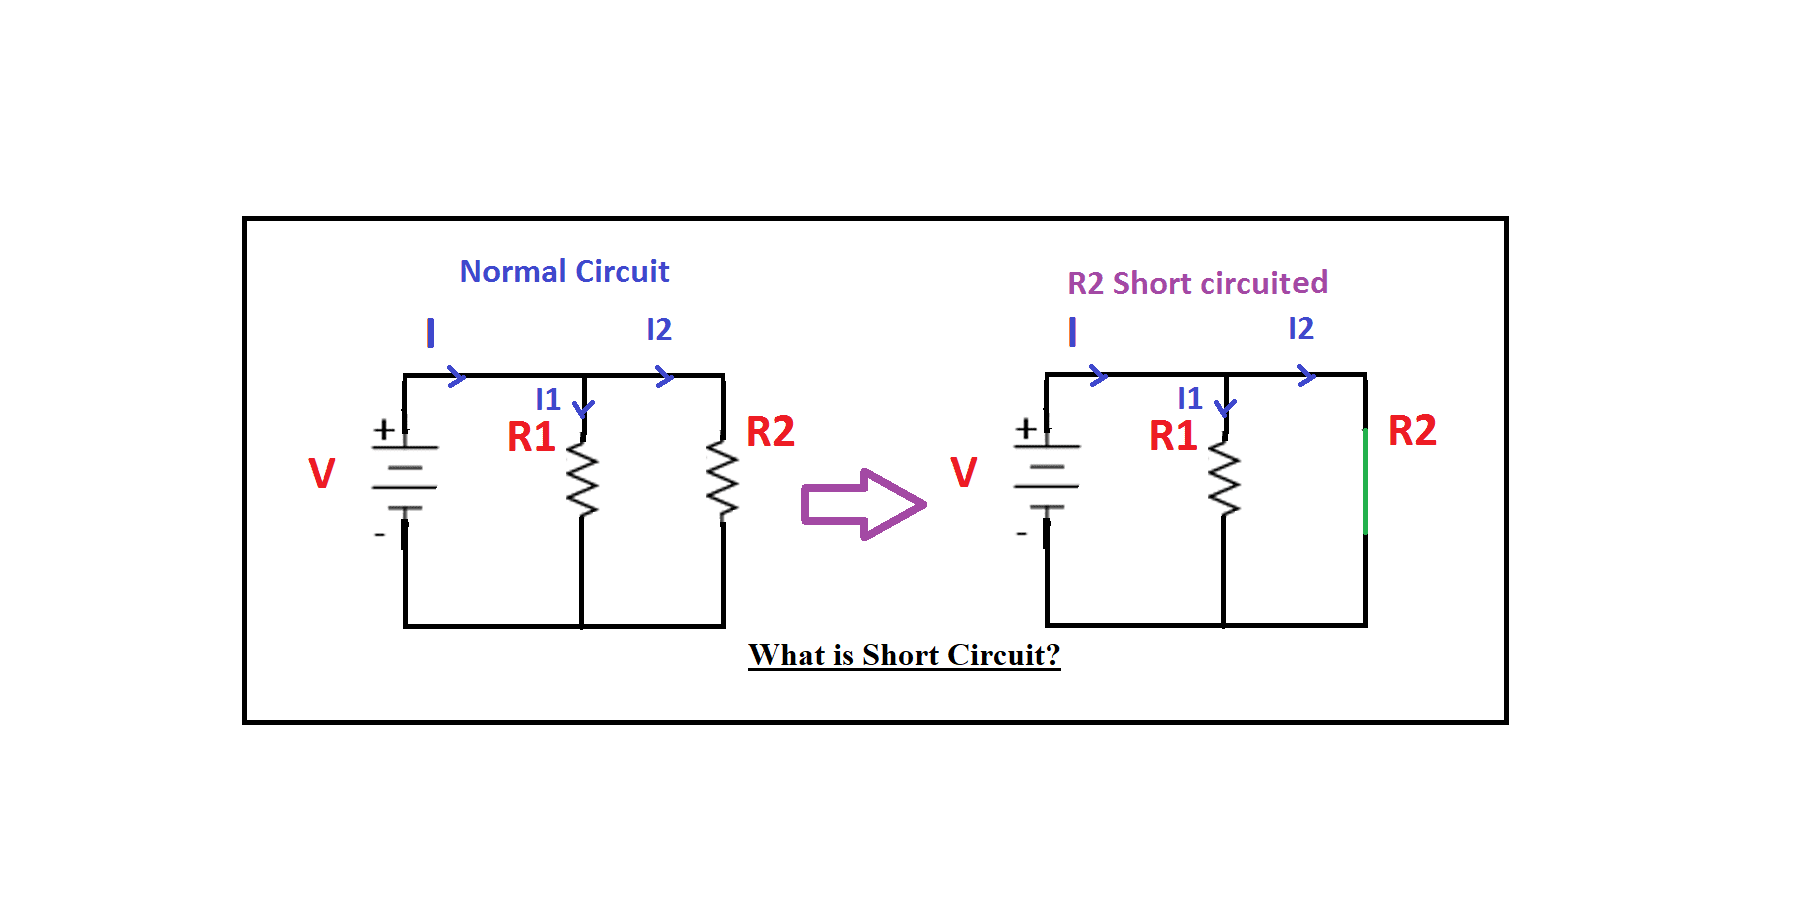 Is there a solid definition of what a short circuit is, or is it